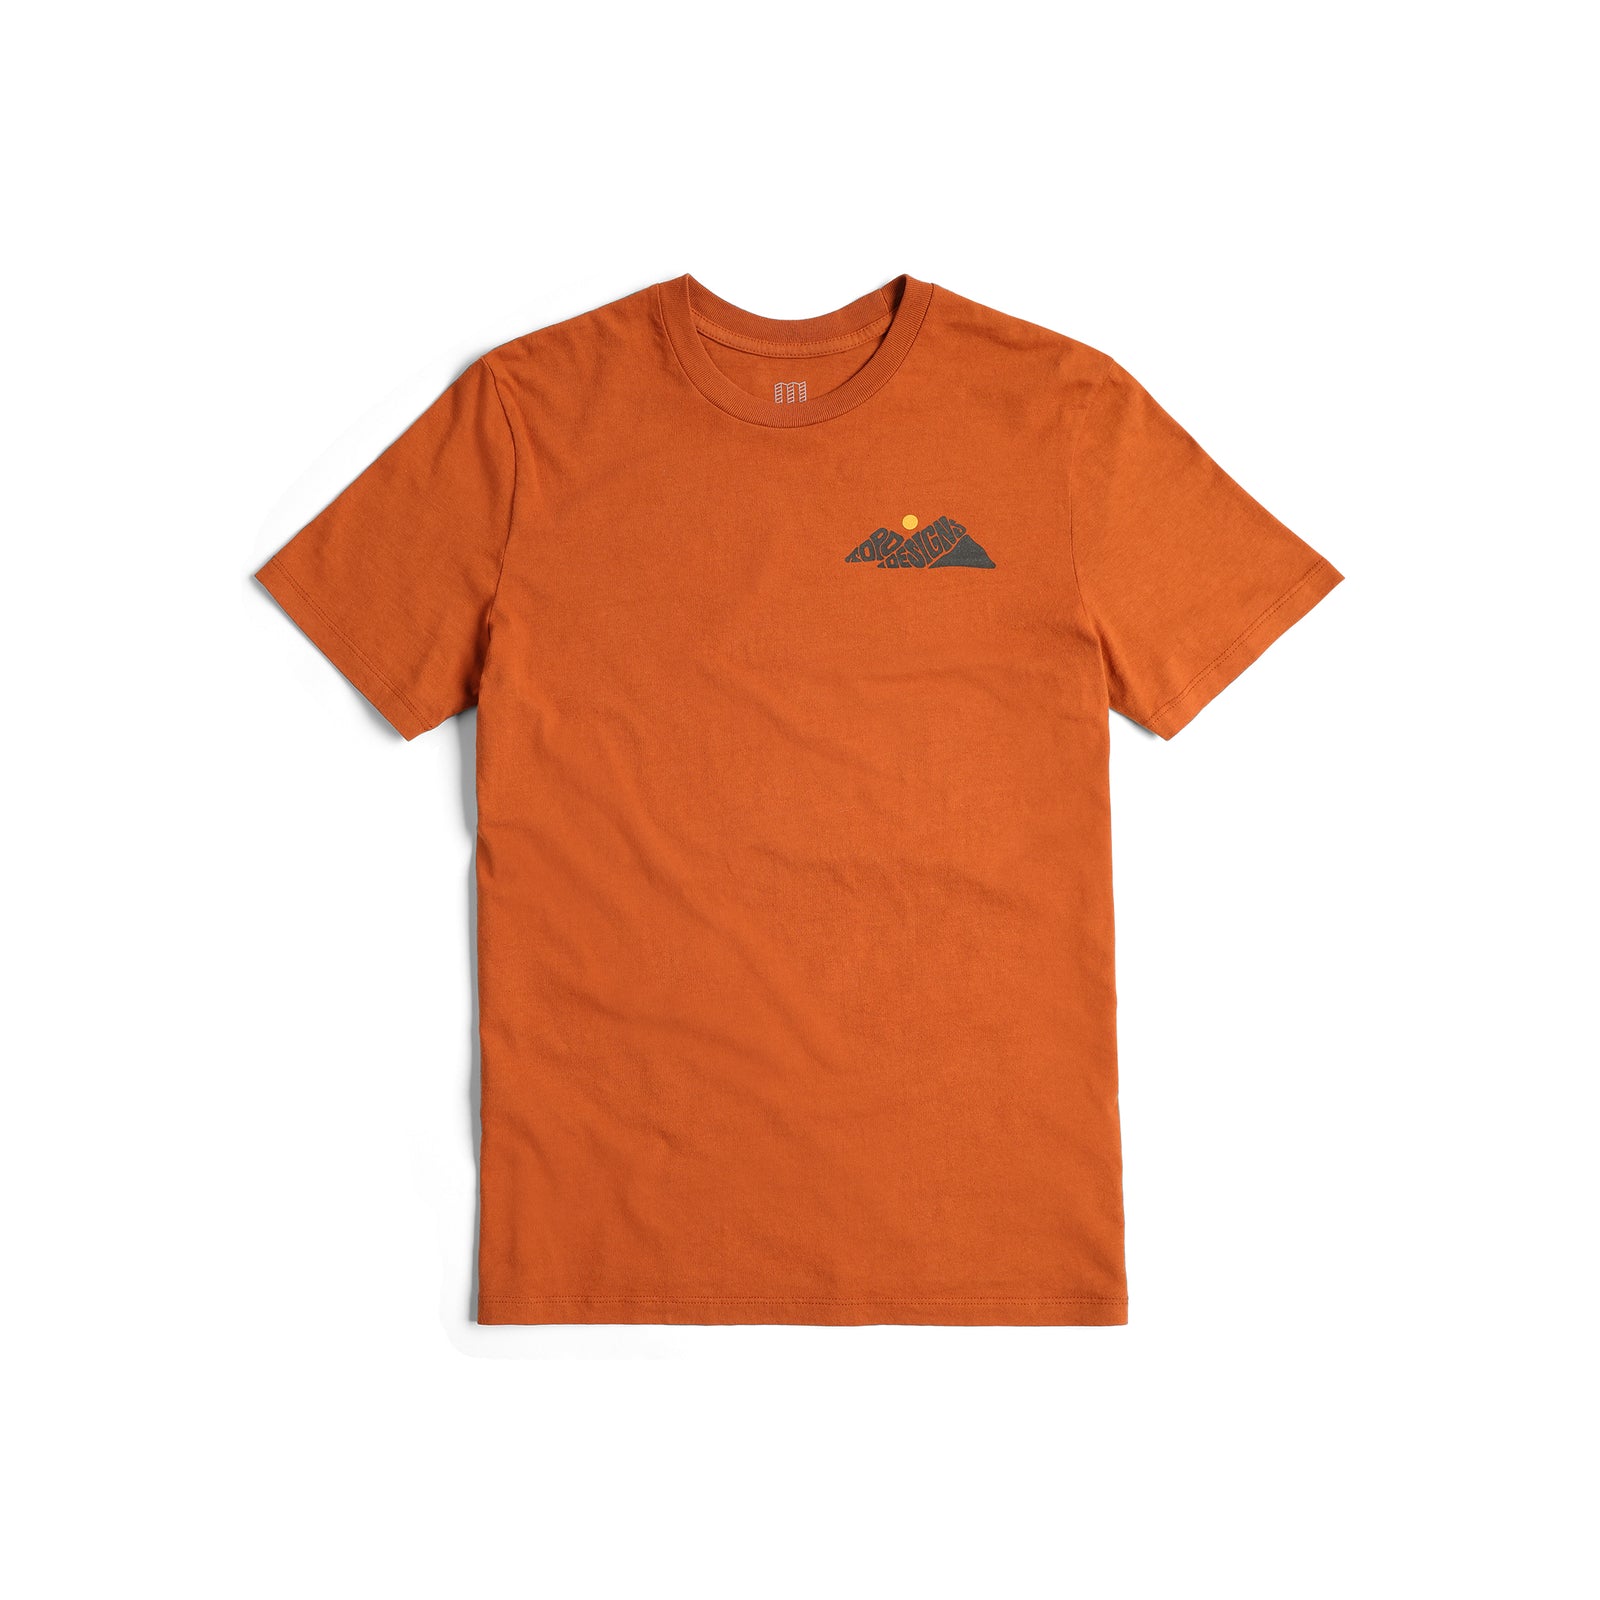 Front View of Topo Designs Rugged Peaks Tee - Men's in "Clay"